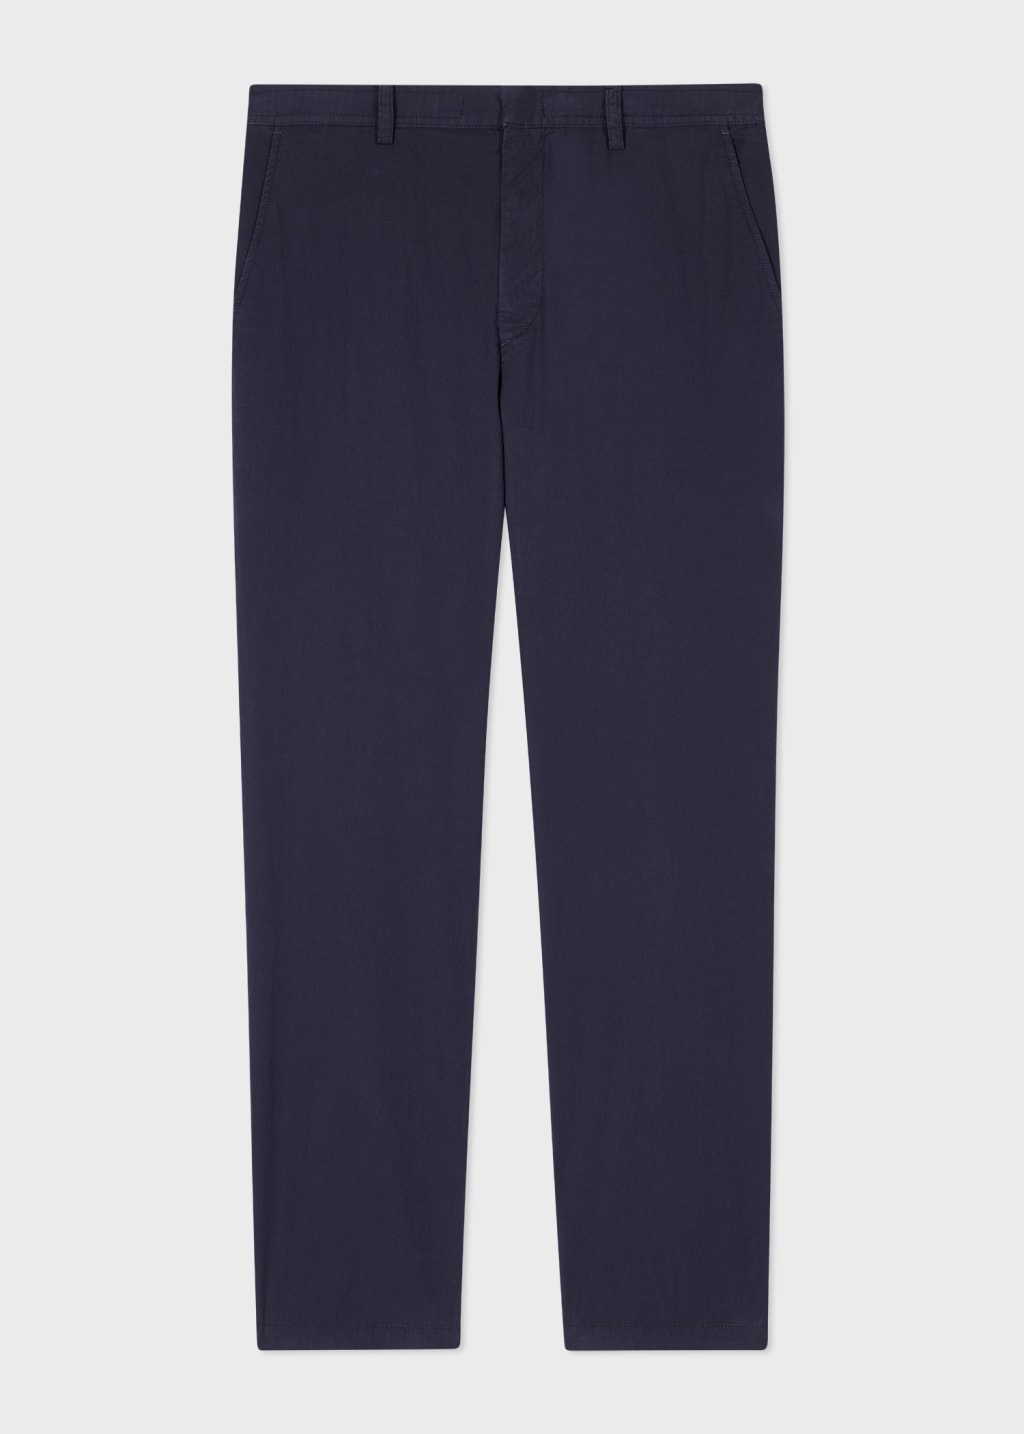 Front View - Navy Organic Cotton-Stretch Elasticated Chinos Paul Smith